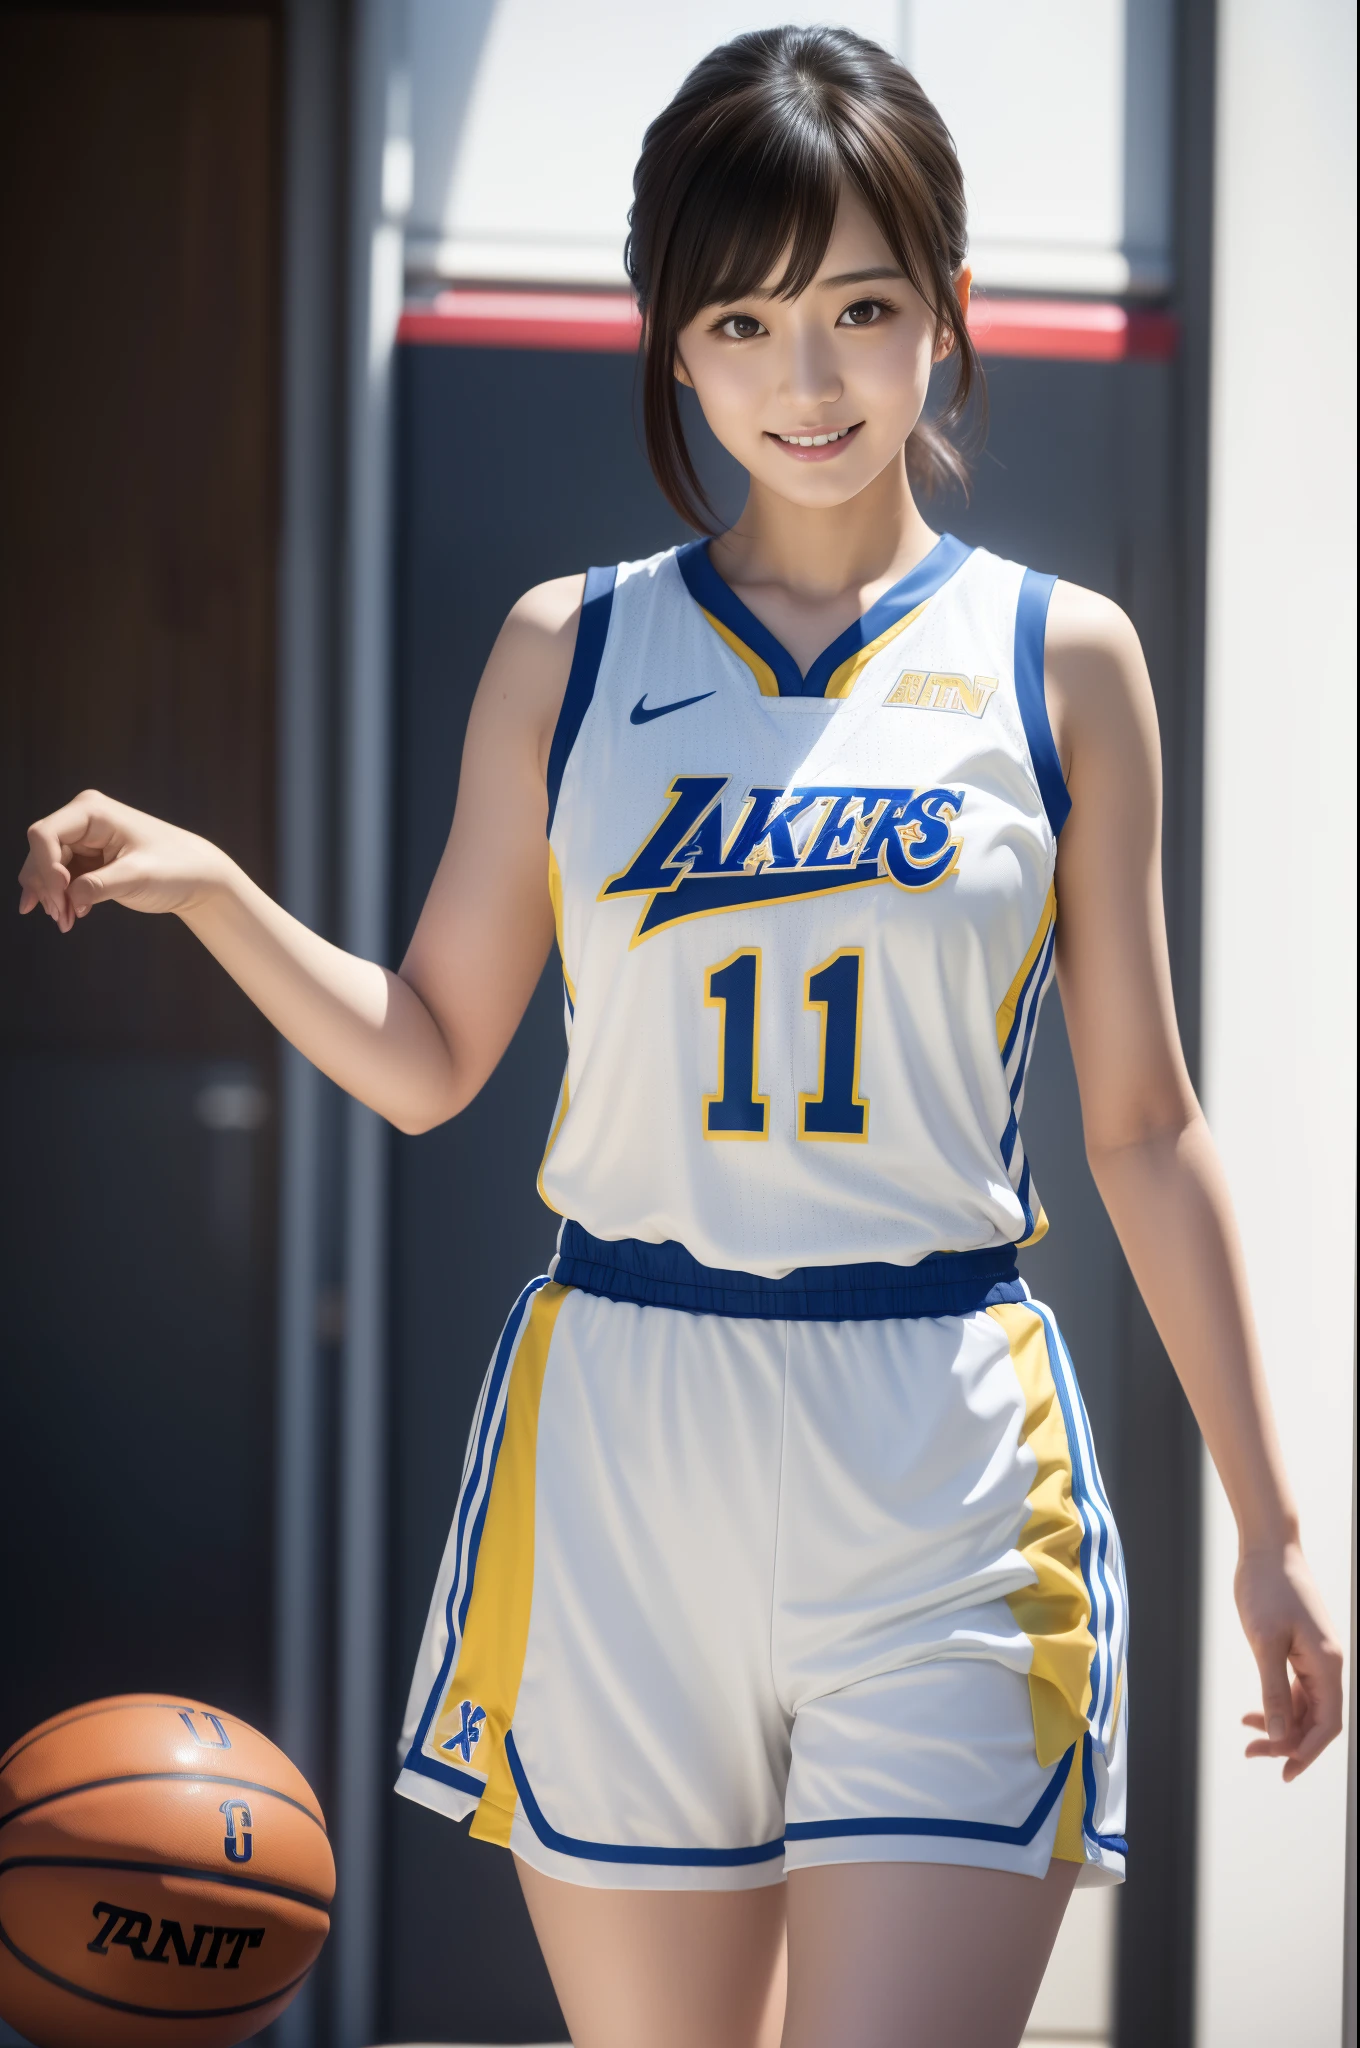 A close up of a woman in a basketball uniform holding a basketball SeaArt  AI